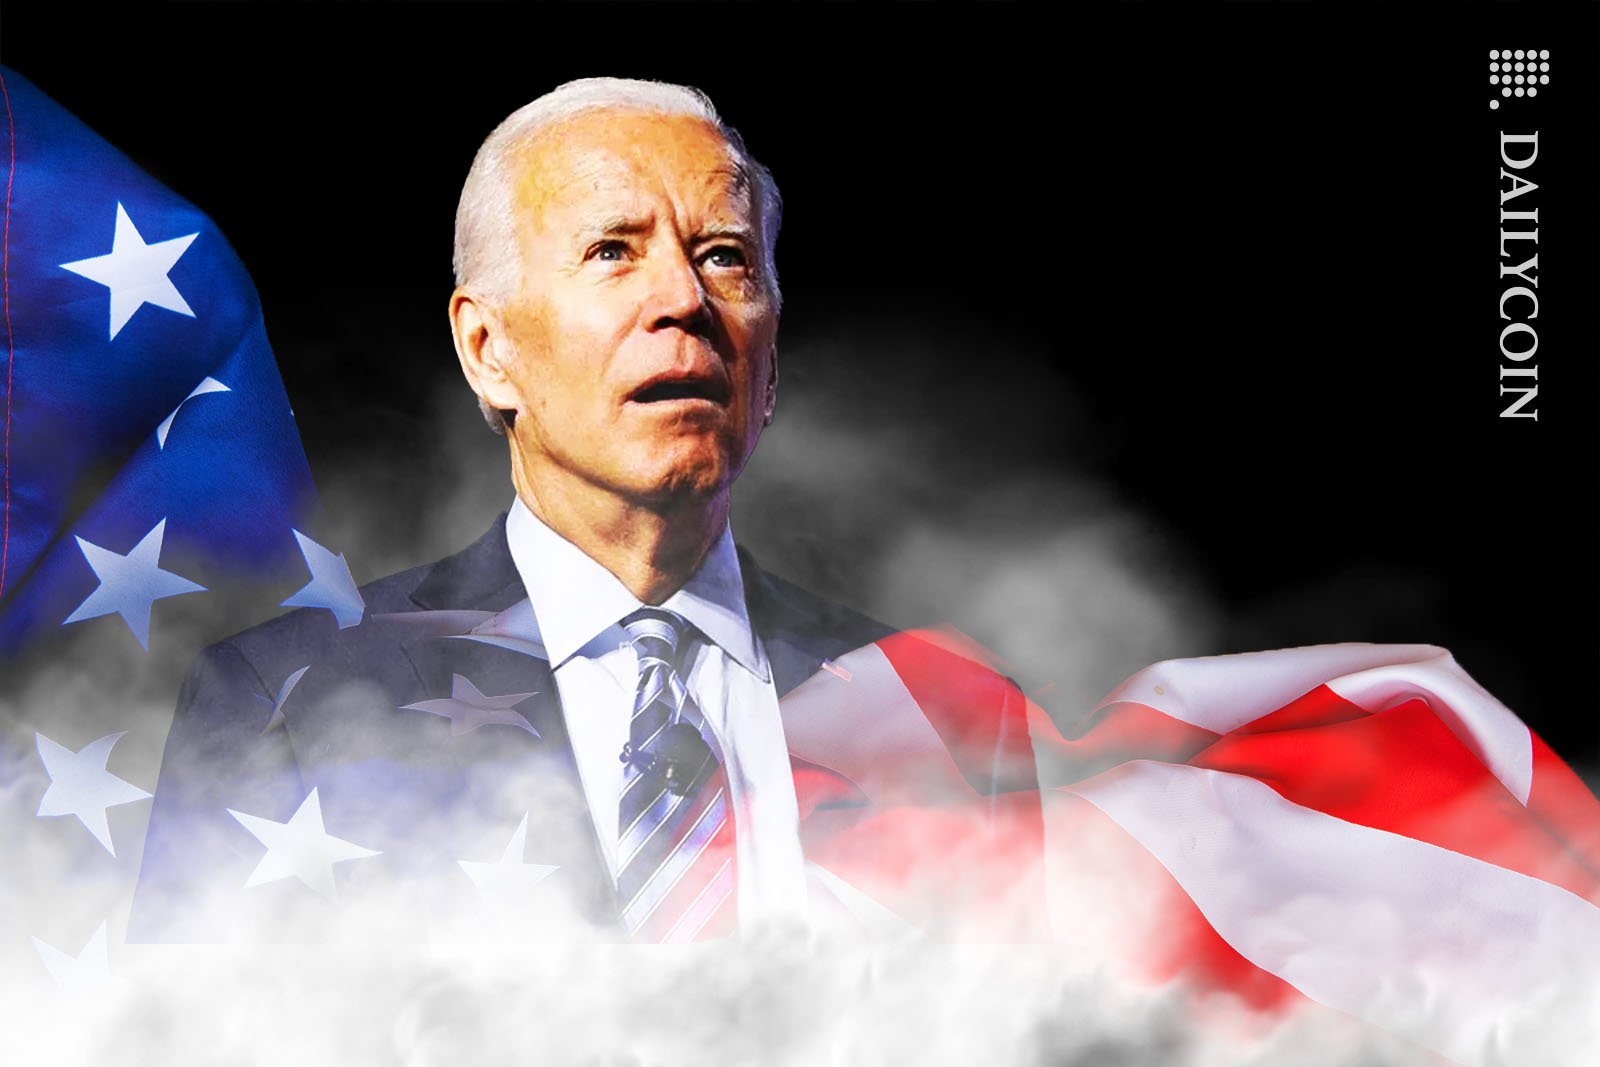 Joe Biden emerging from the American flag and fog whilst looking very confused staring into the distance.